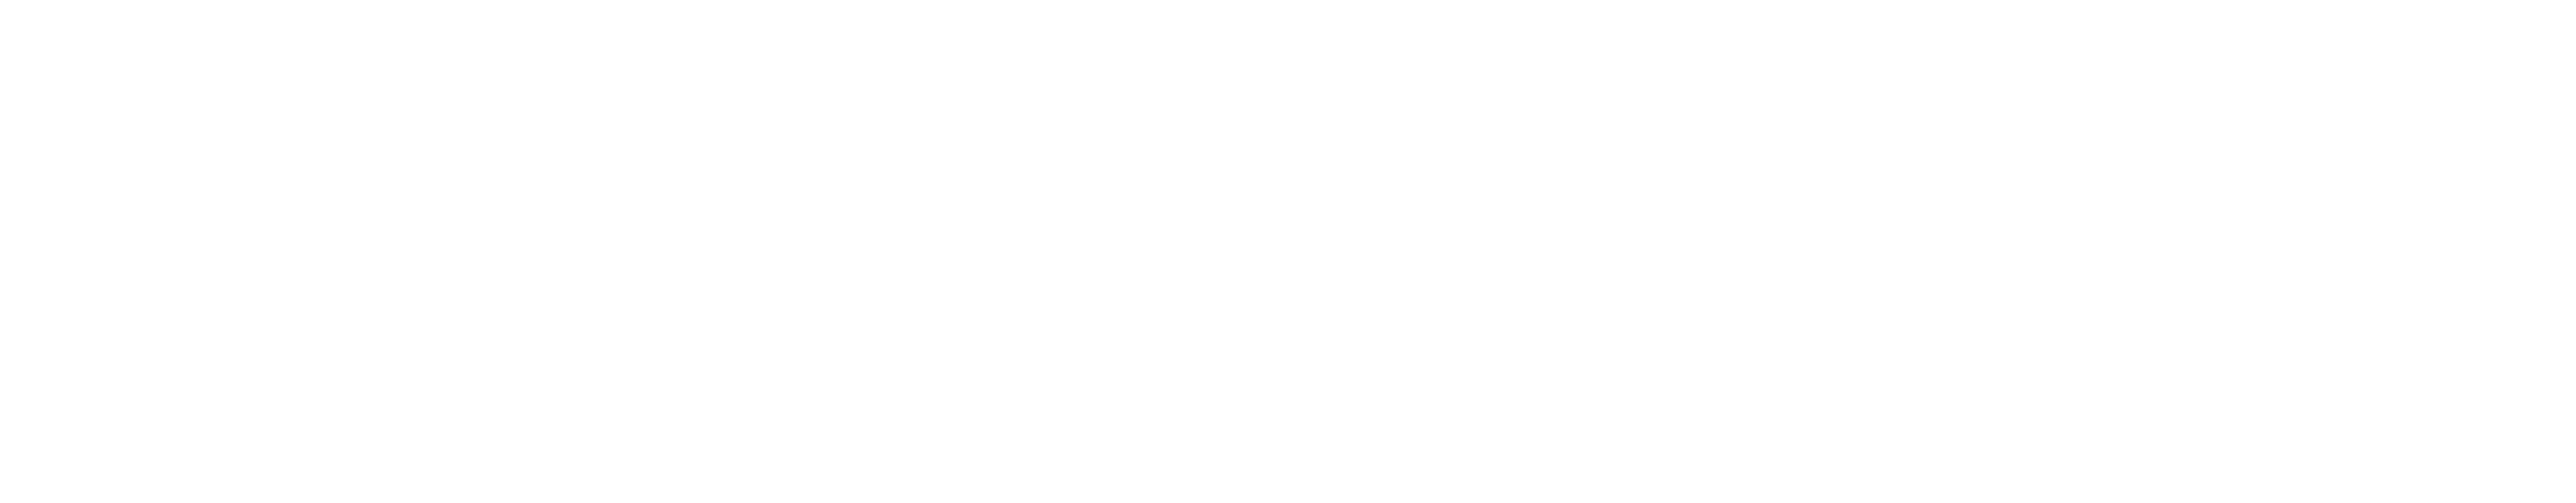 Grovewood Groundworks Contracts Ltd